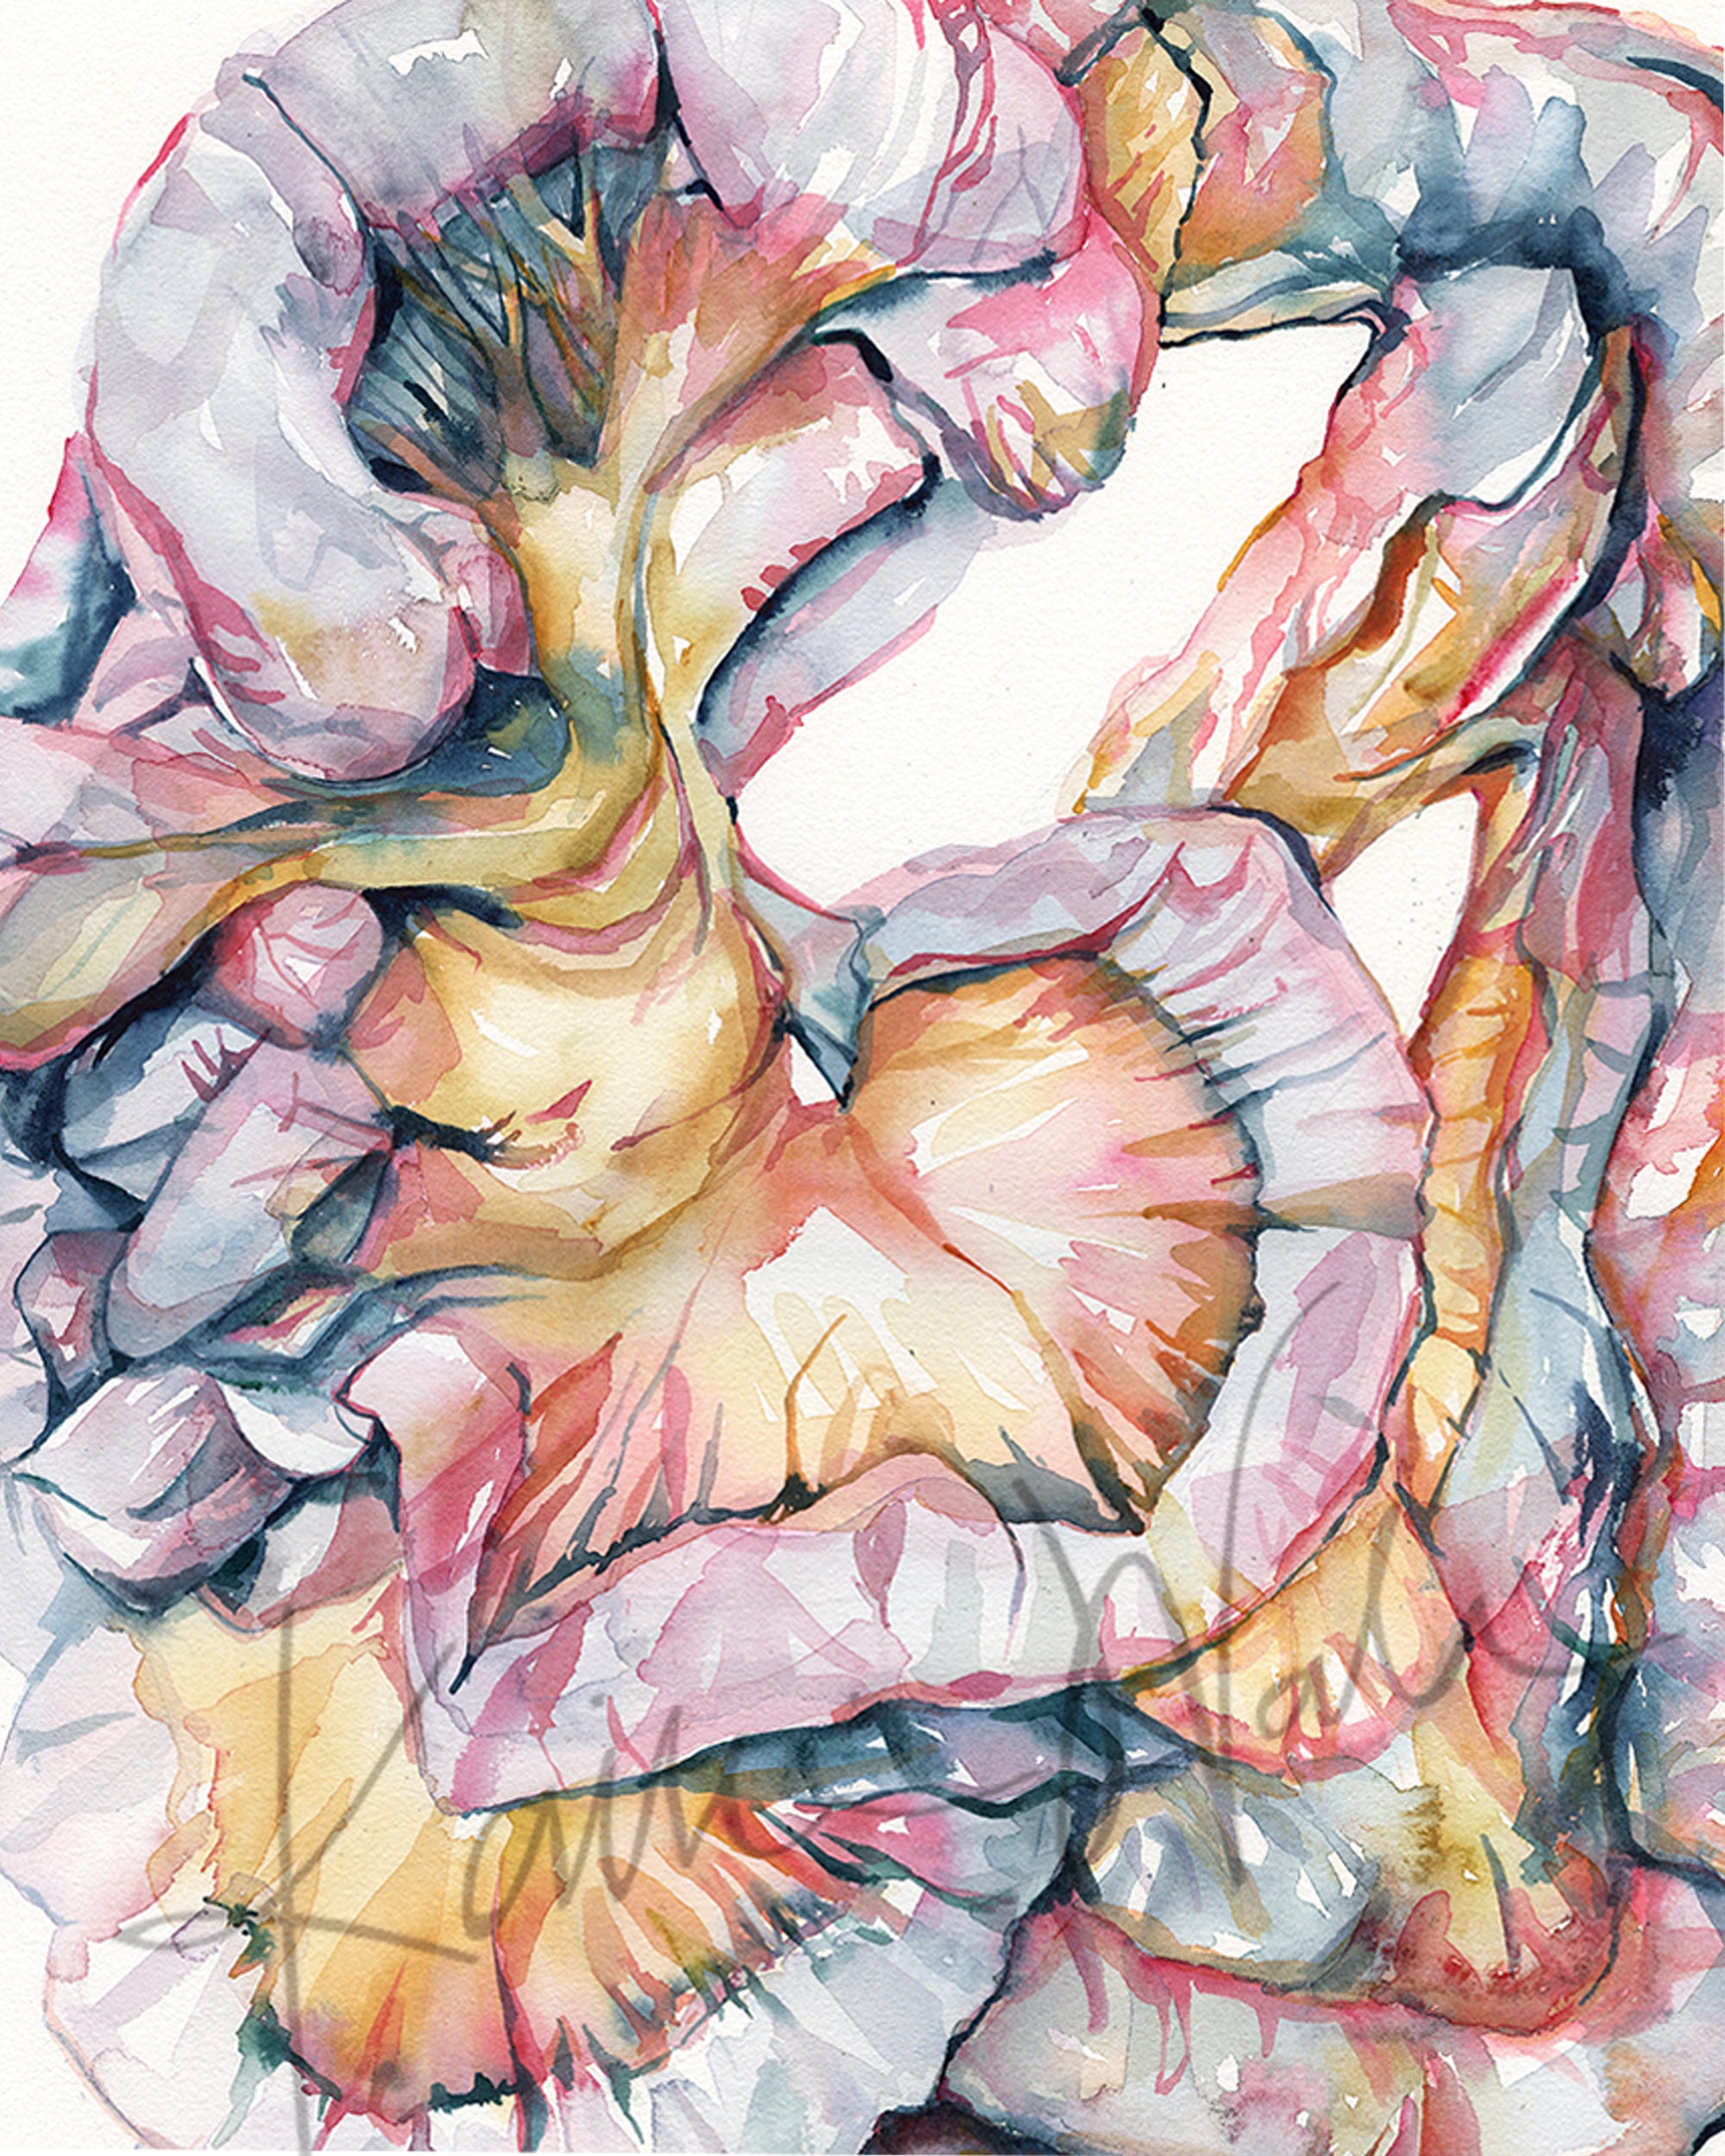 Unframed watercolor painting of the intestines and mesentery folds in soft, light pastels.